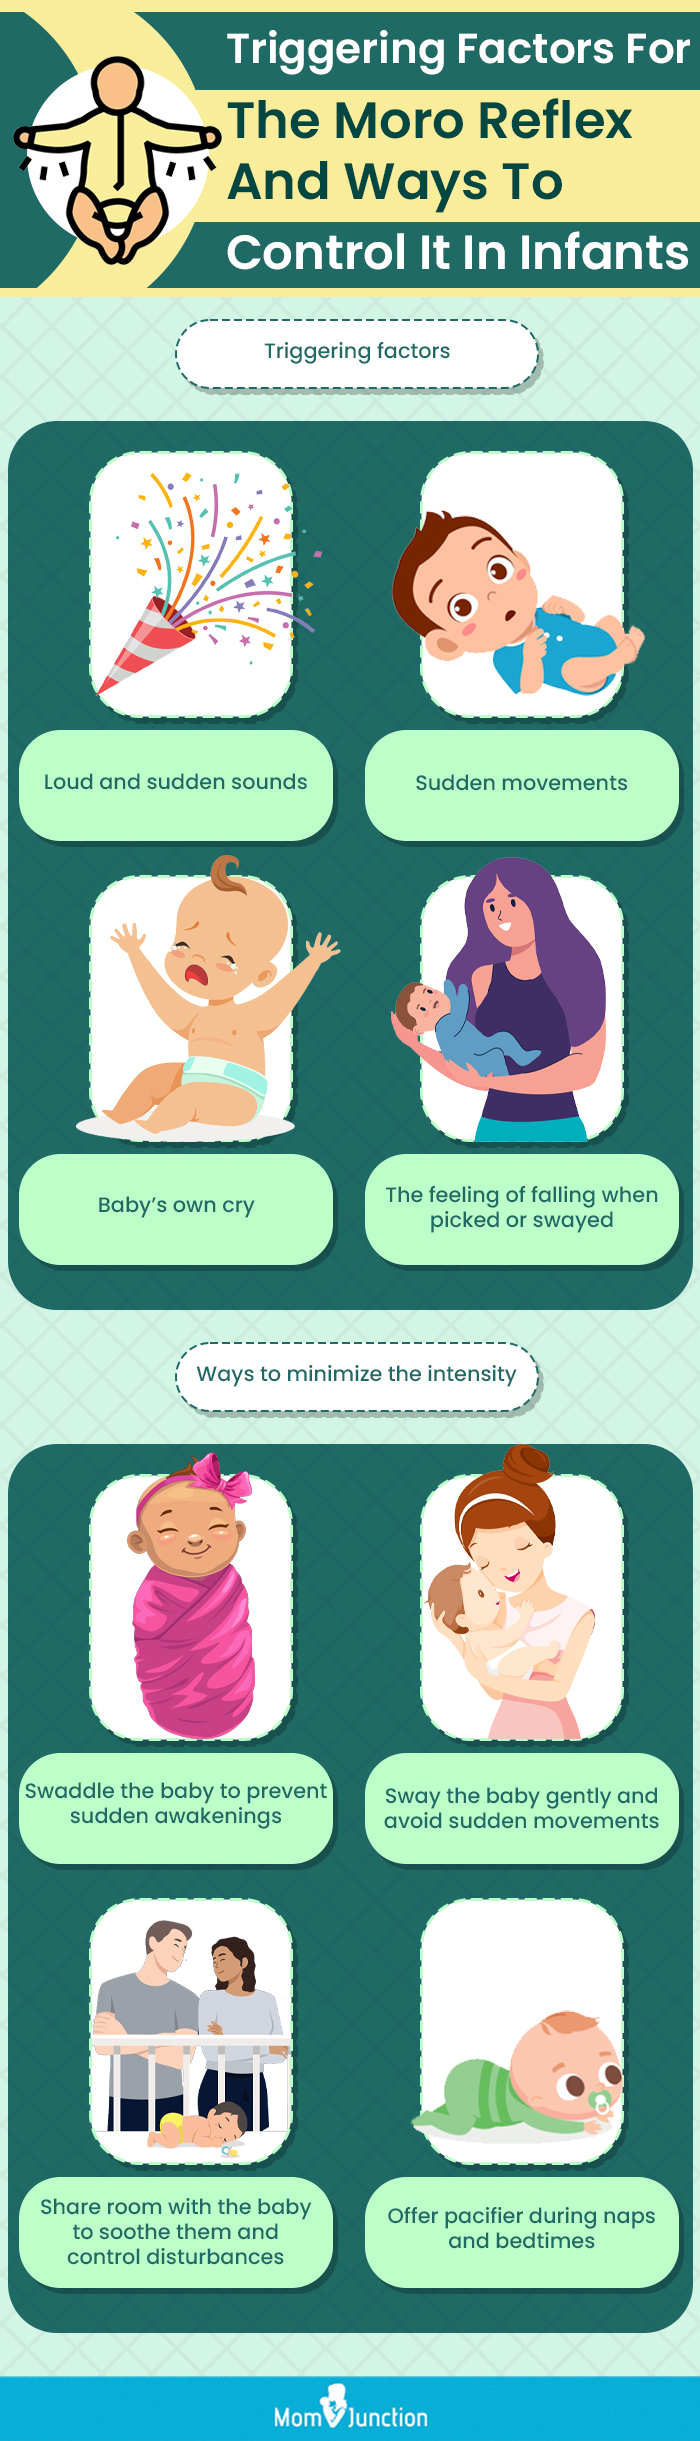 triggering factors for the moro reflex and ways to control it in infants (infographic)